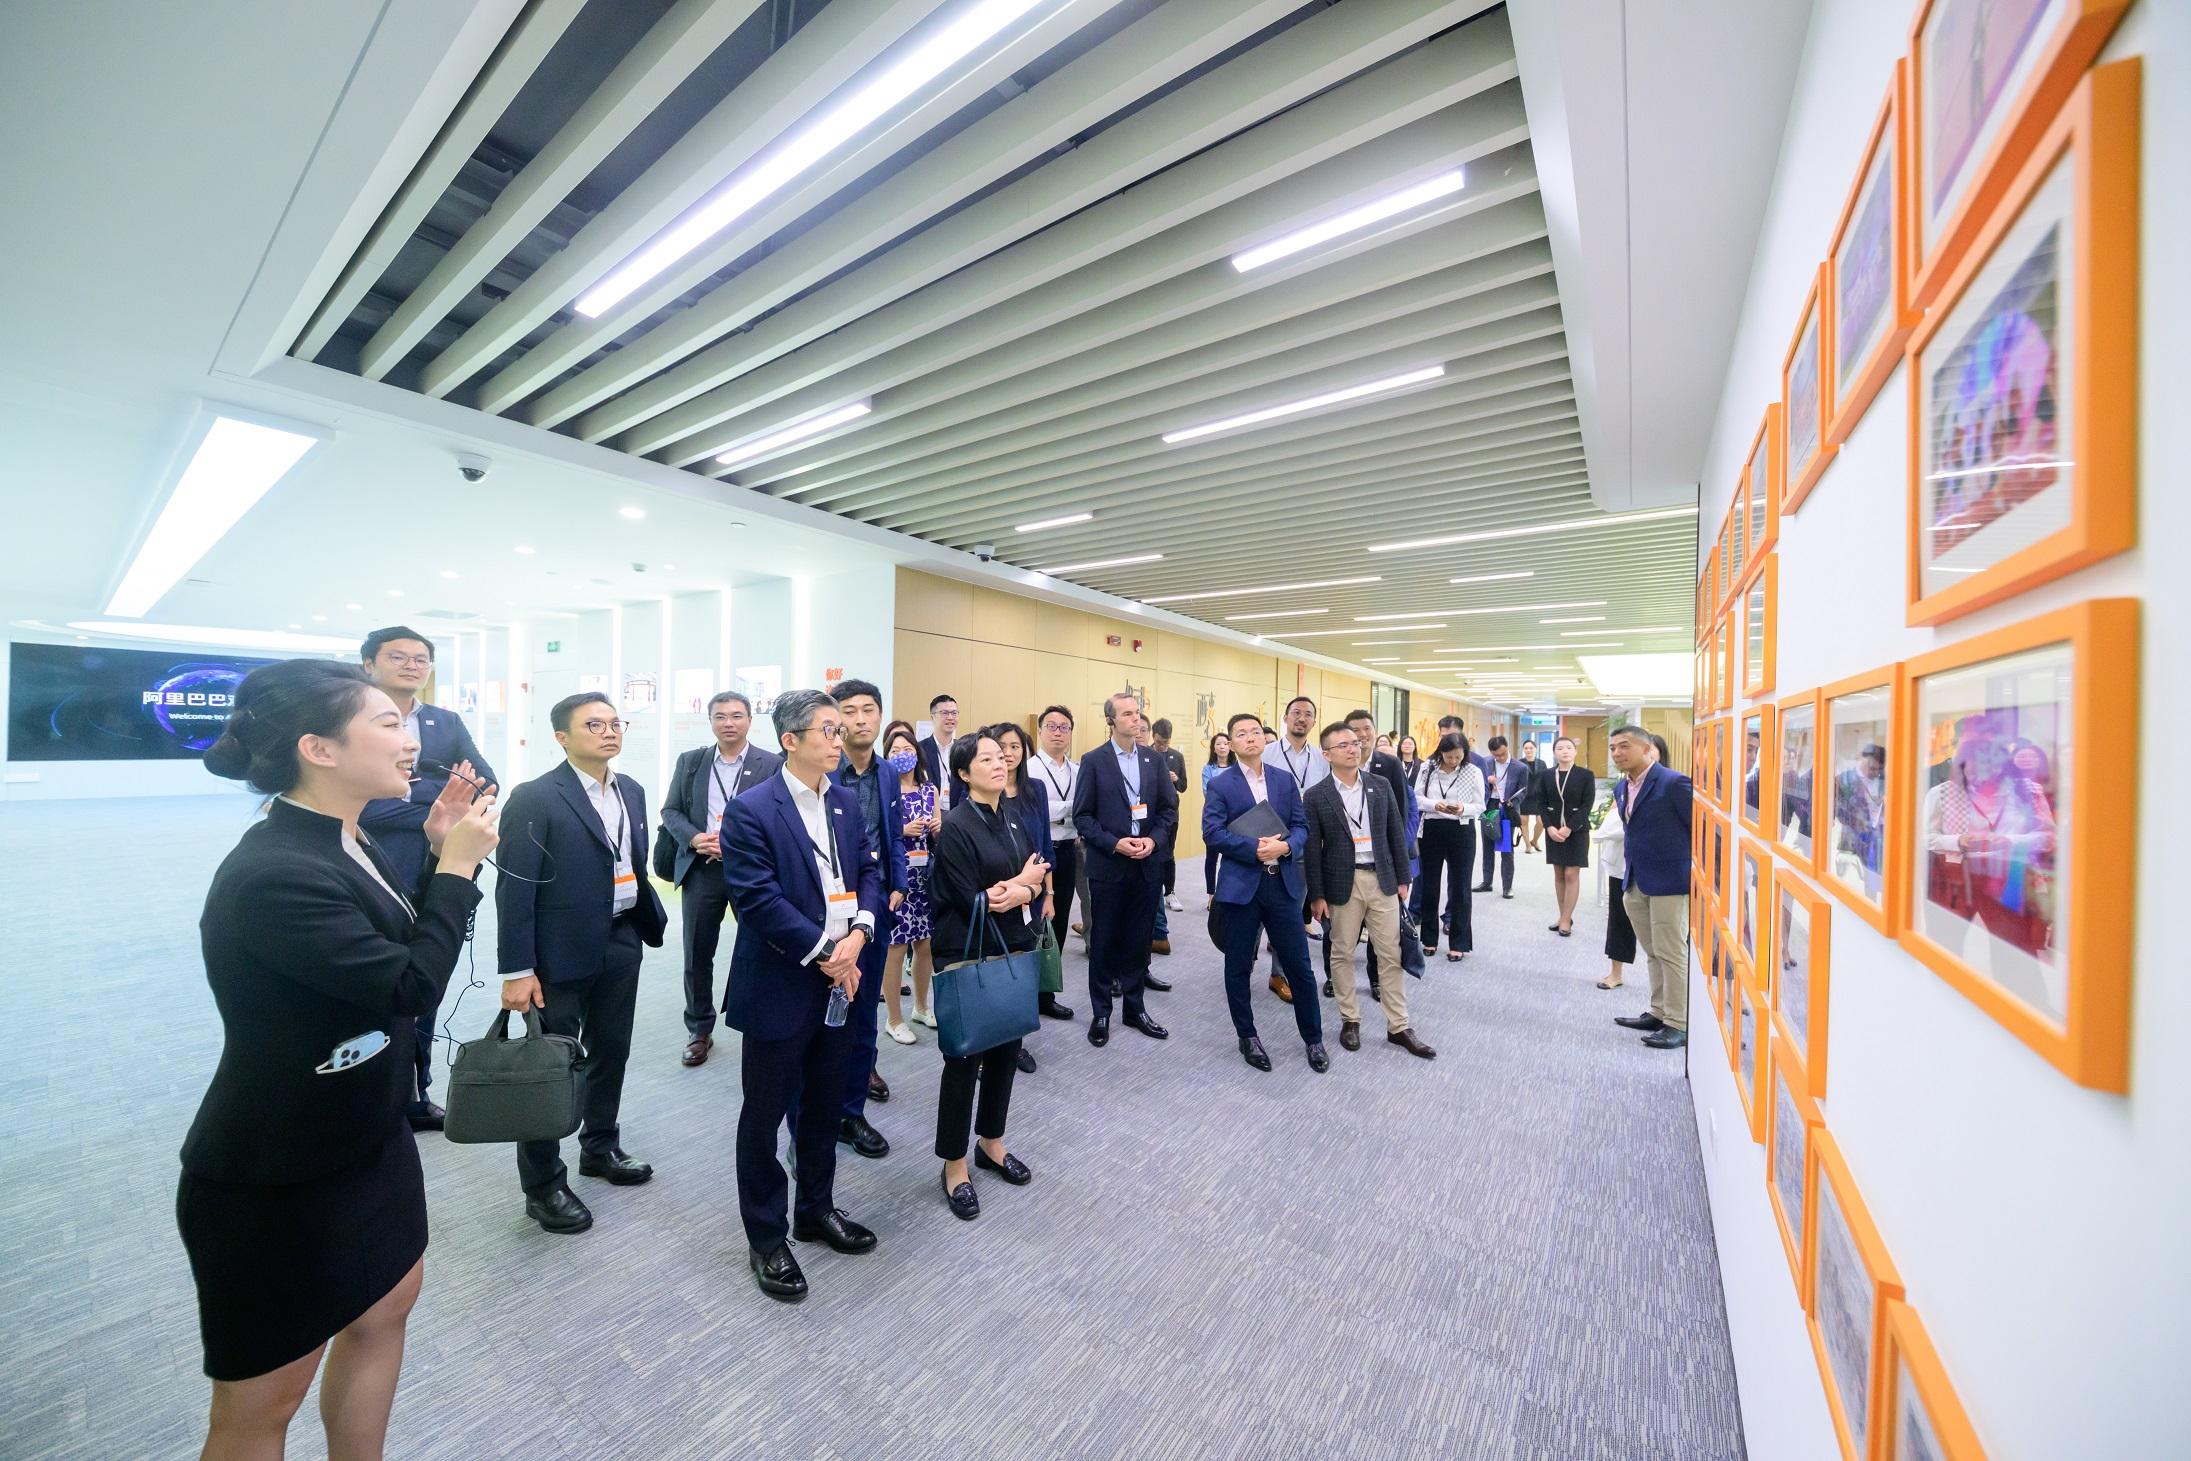 A delegation of participants of the Hong Kong Academy of Finance Financial Leaders Programme (FLP) completed the inaugural FLP field trip to Shenzhen from September 24 to 27. The FLP cohorts have immersive experiences in multiple showrooms during the field trip.